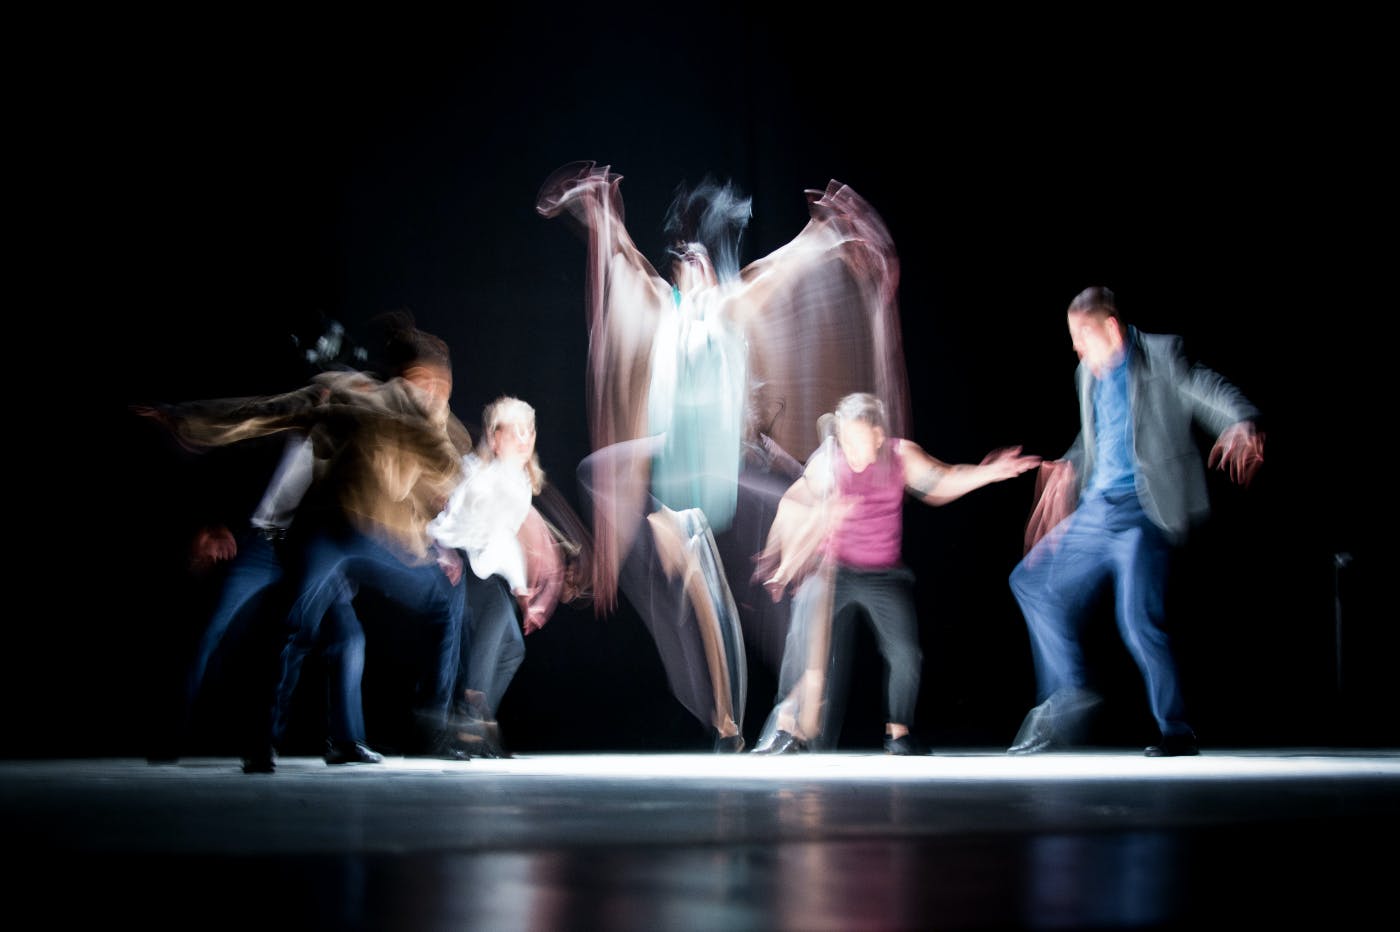 A group of people on stage in motion